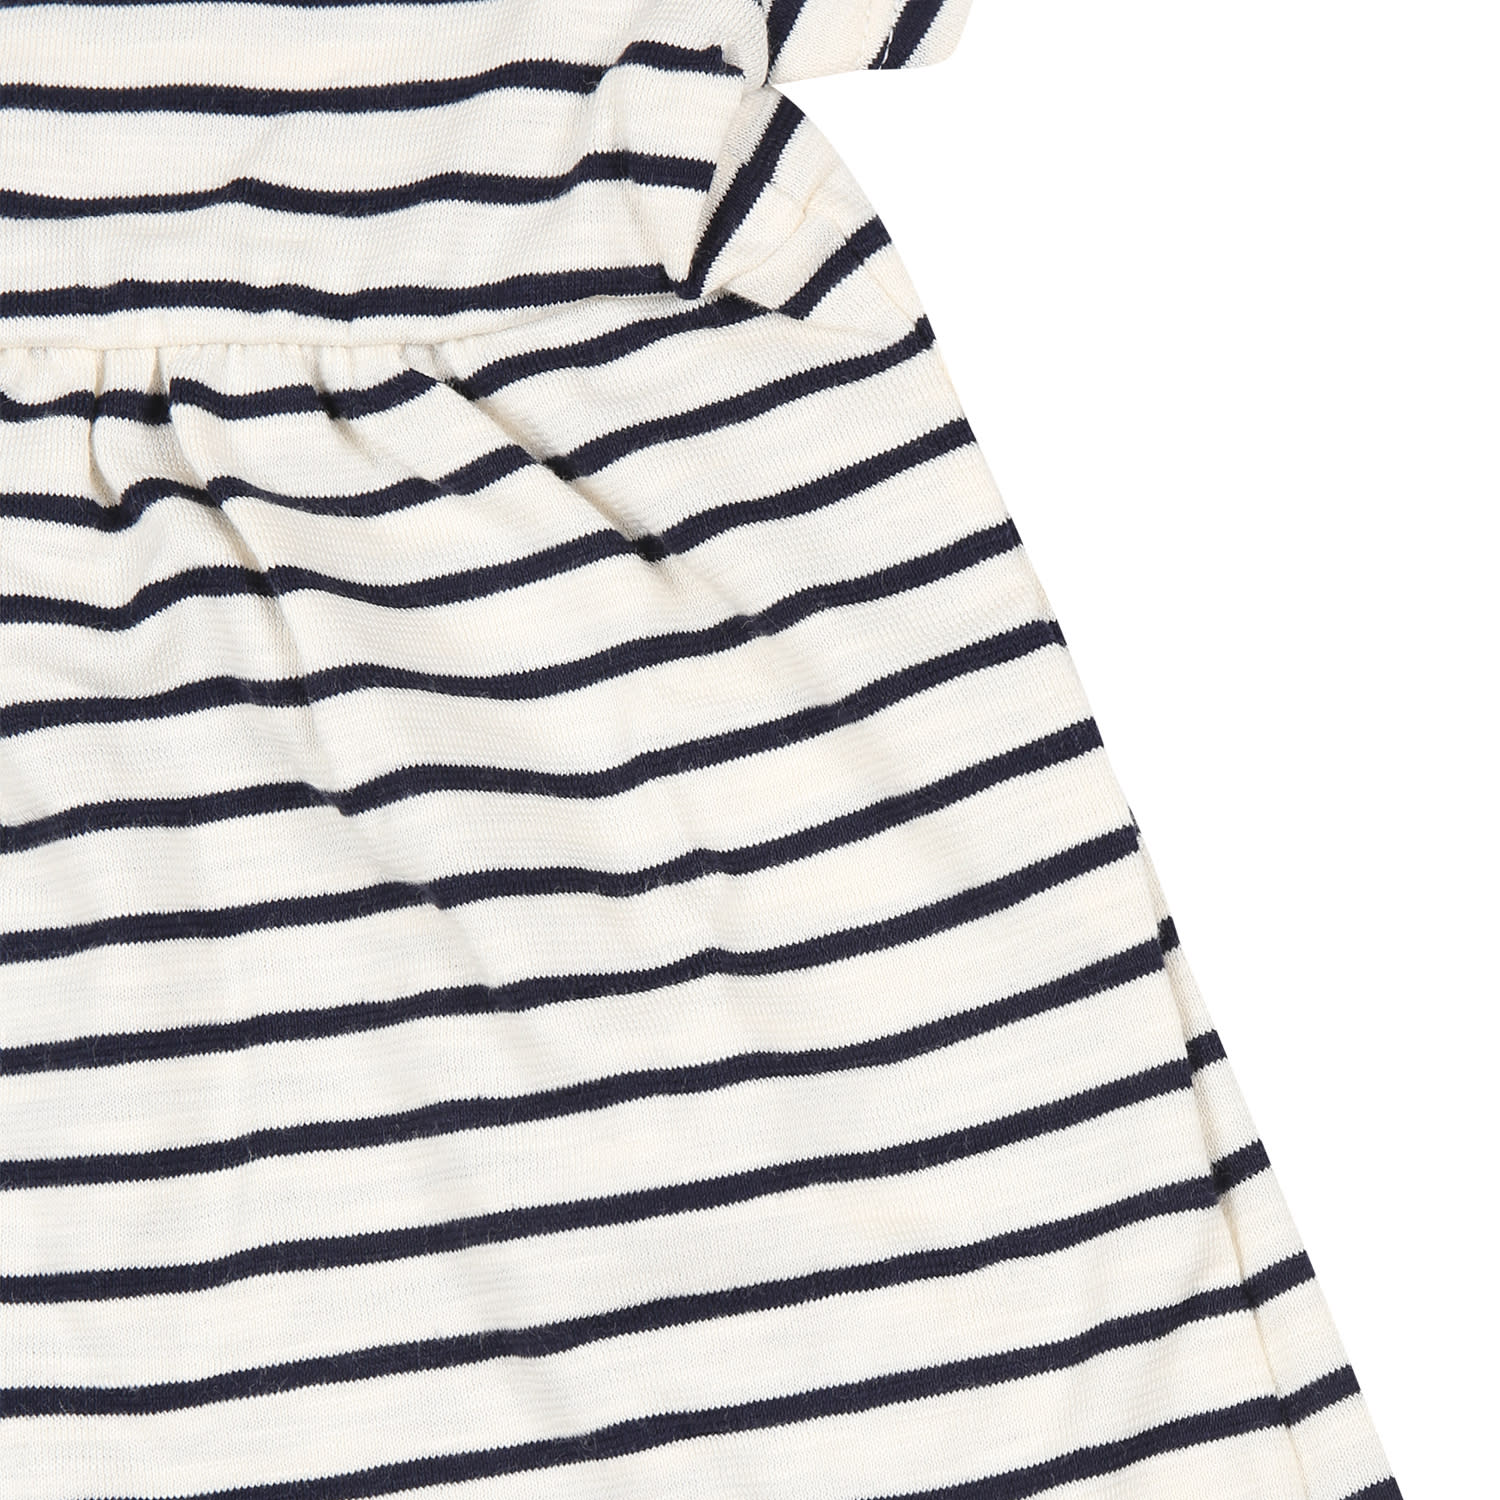 Shop Petit Bateau Ivory Dress For Baby Girl With Blue Stripes In White